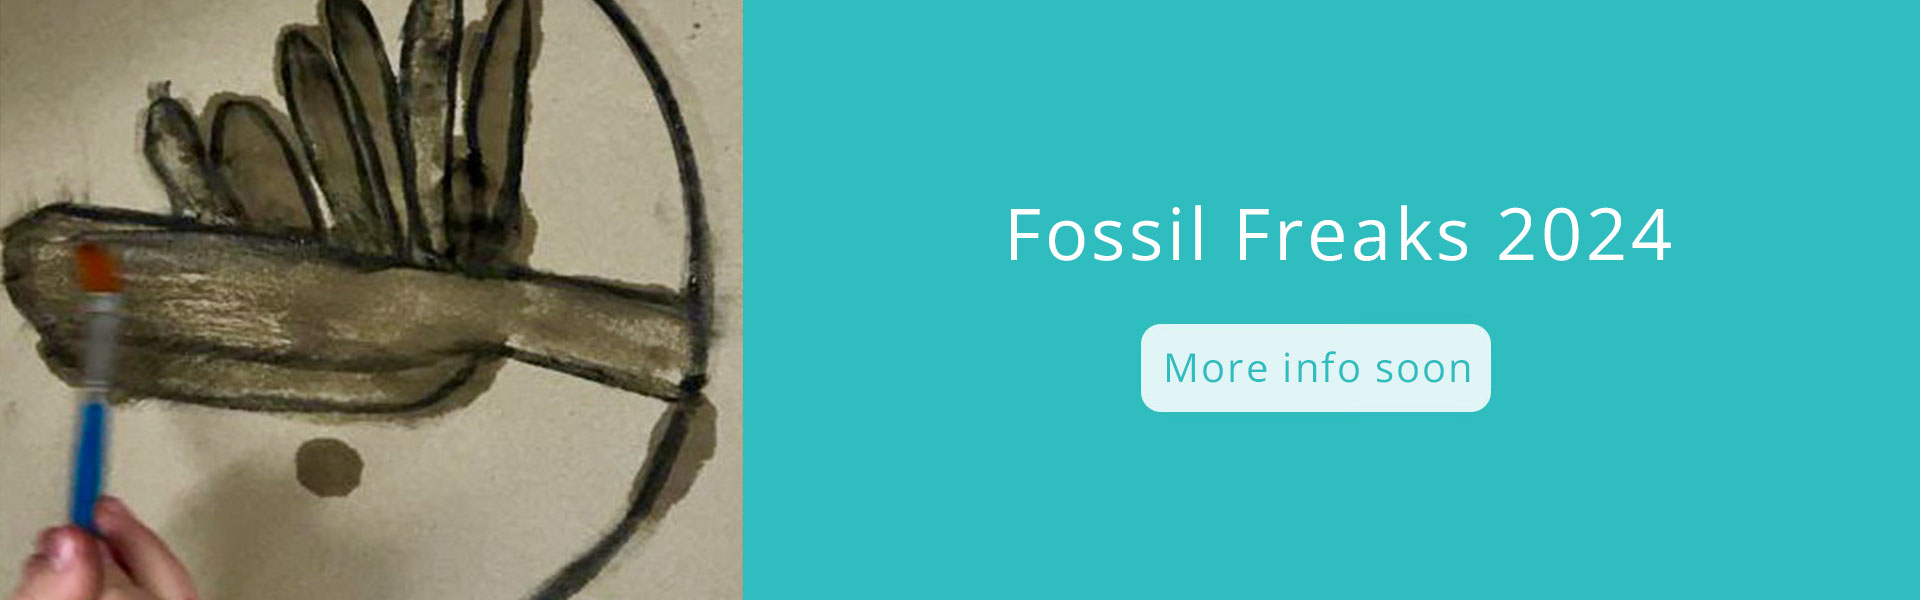 Other projects - Fossil Freaks 2024